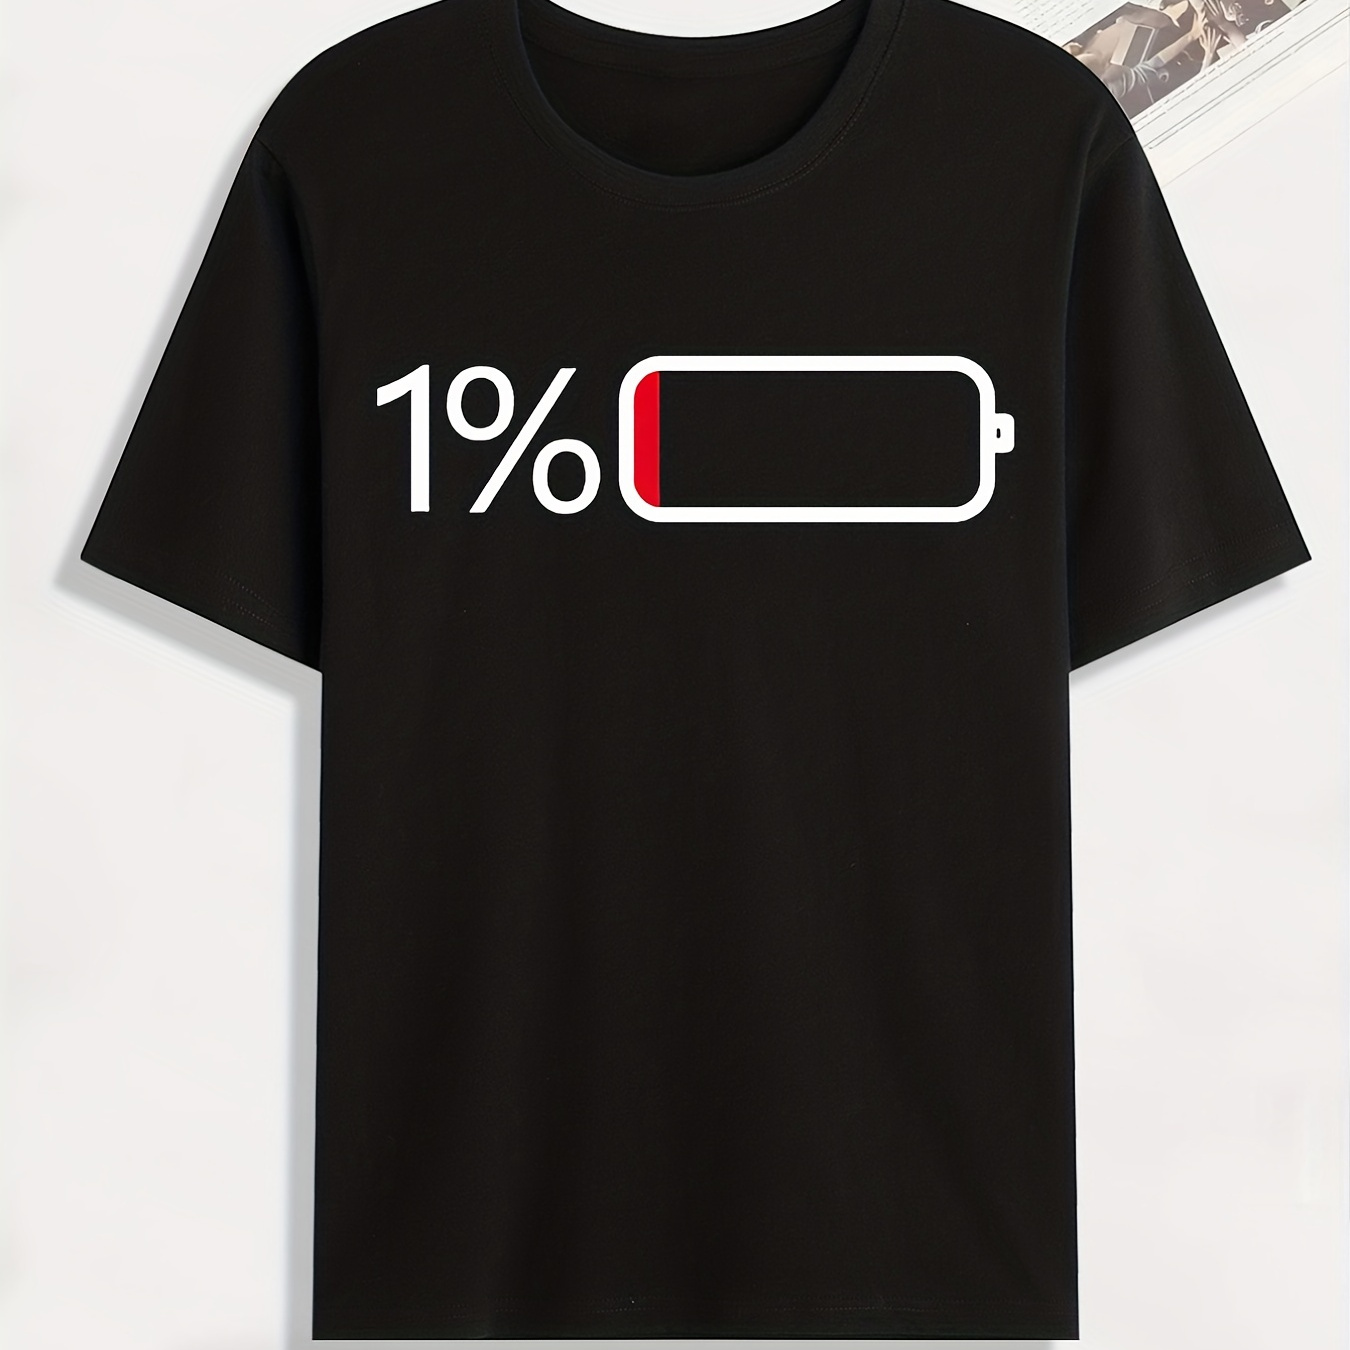 Battery Low Print T Shirt, Tees For Men, Casual Short Sleeve Tshirt For Summer Spring Fall, Tops As Gifts